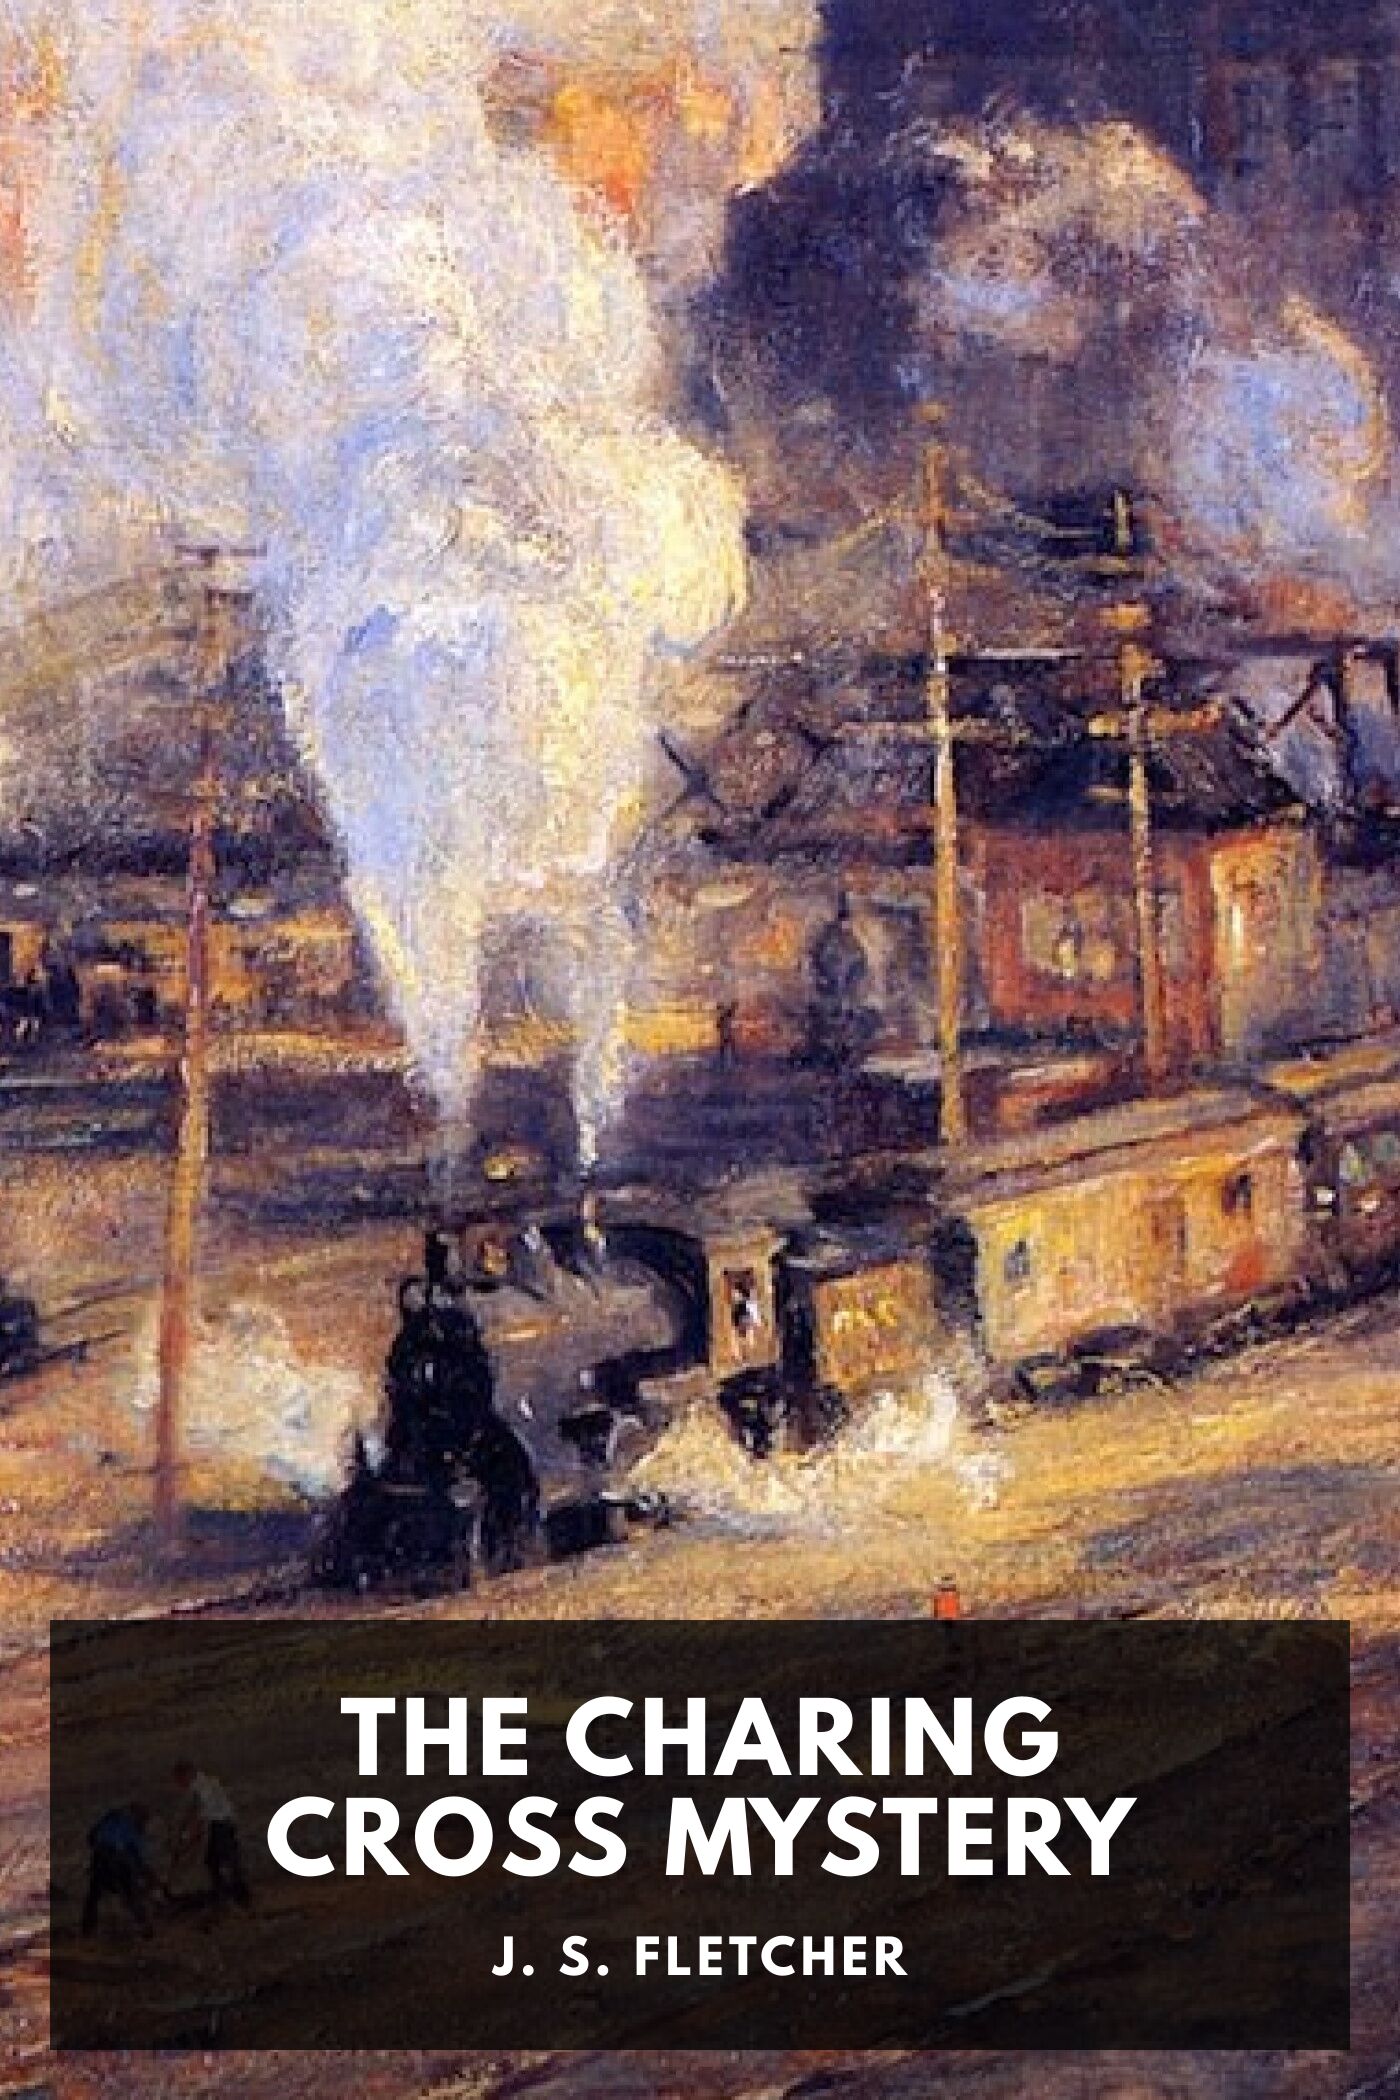 The Charing Cross Mystery, by J. S. Fletcher - Free ebook download